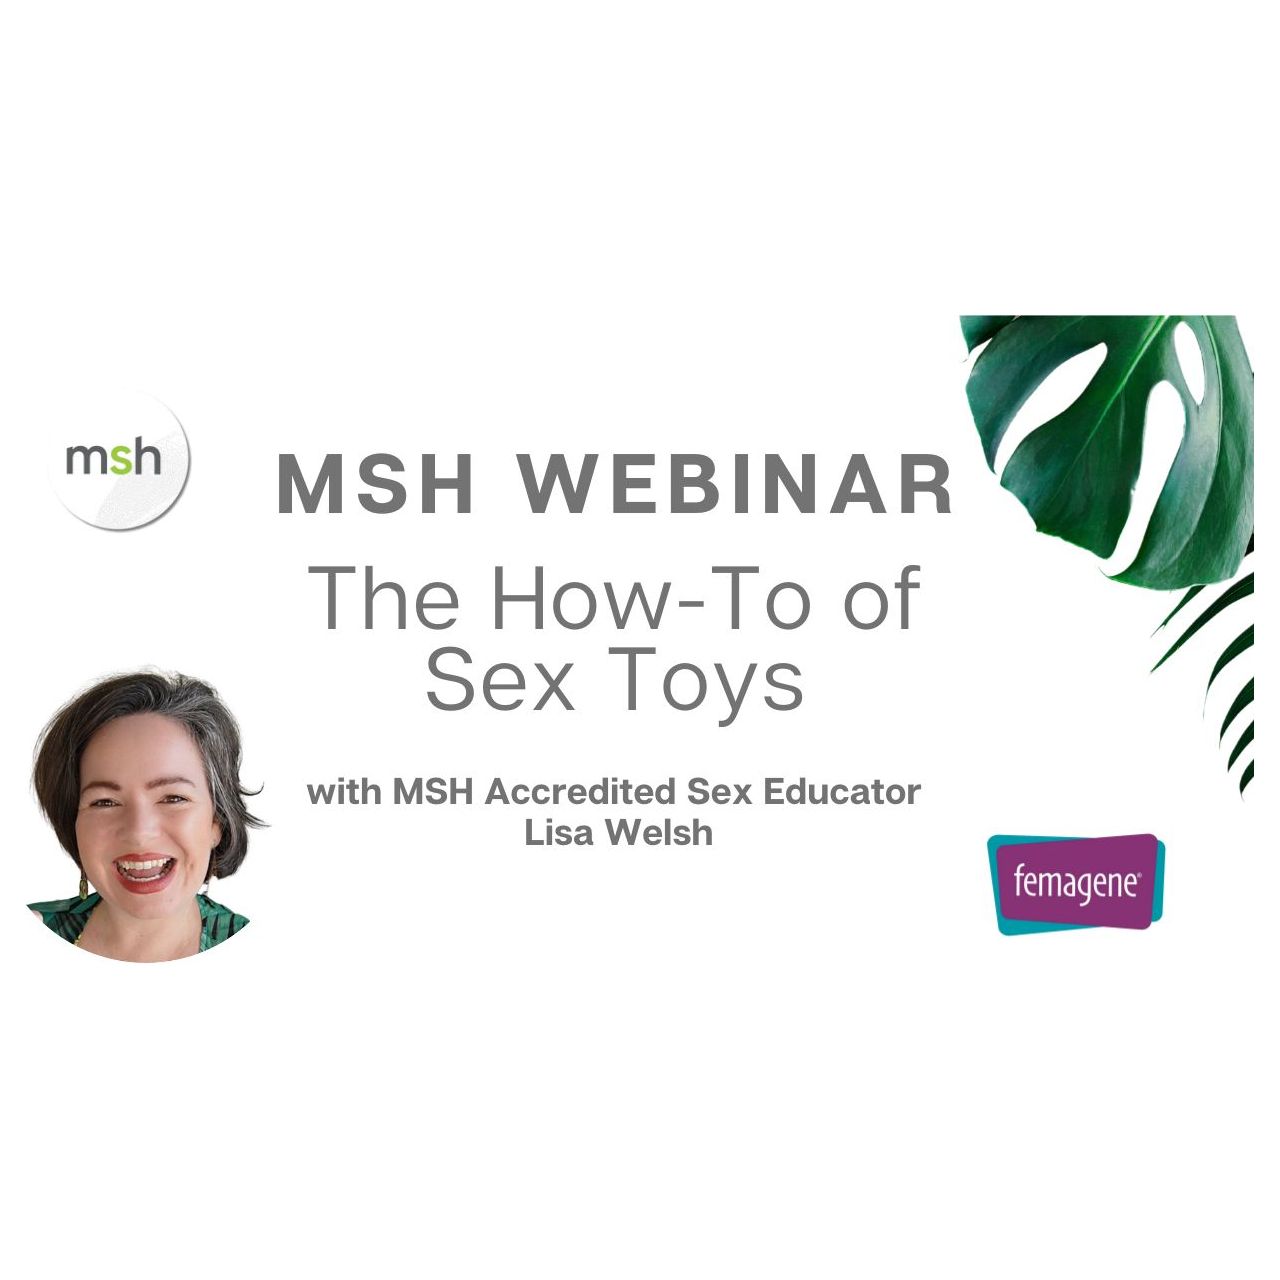 MSH WEBINAR: The How-To of Sex Toys with Lisa Welsh worth ONE Clinical CPD Point